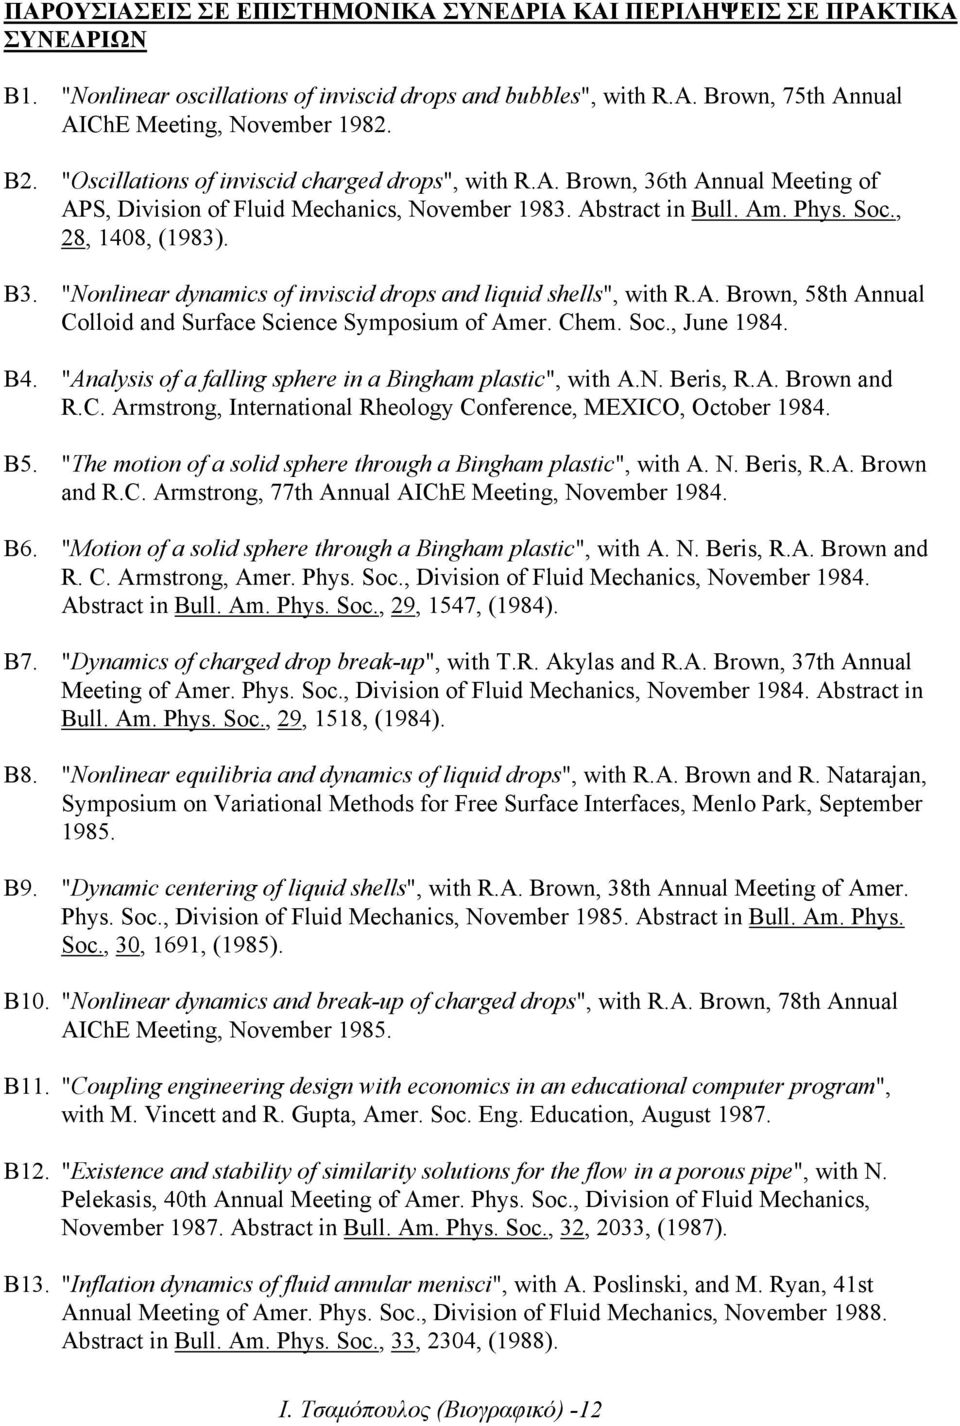 "Nonlinear dynamics of inviscid drops and liquid shells", with R.A. Brown, 58th Annual Colloid and Surface Science Symposium of Amer. Chem. Soc., June 1984. B4.